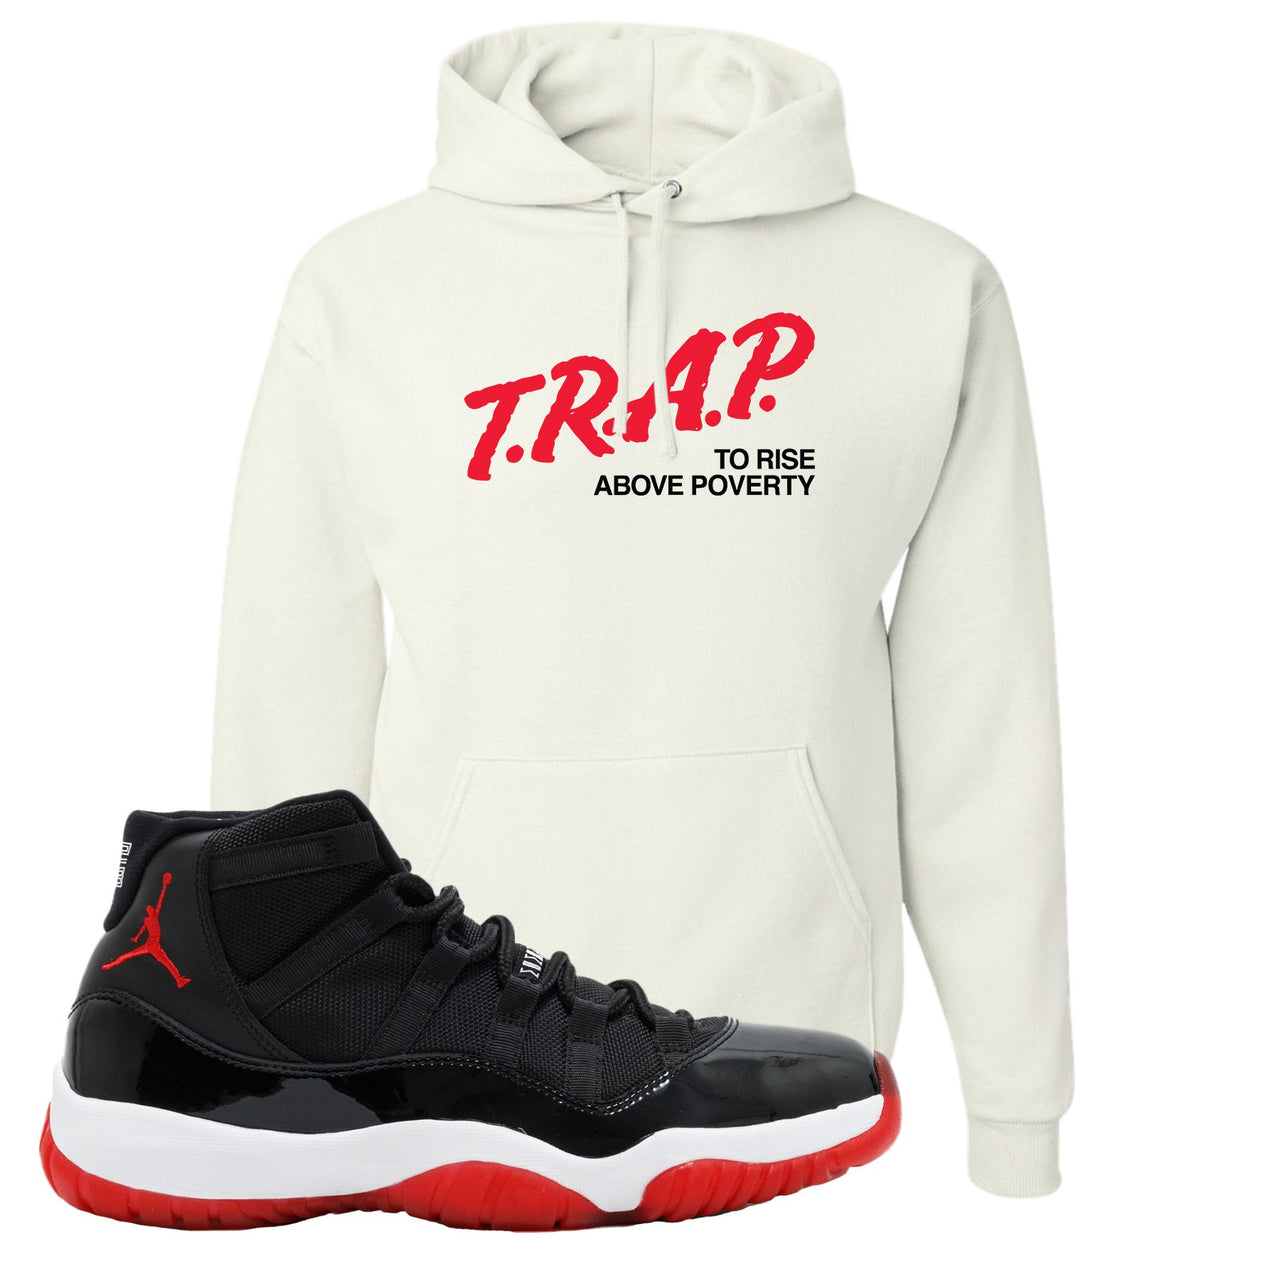 Jordan 11 Bred Trap To Rise Above Poverty White Sneaker Hook Up Pullover Hoodie